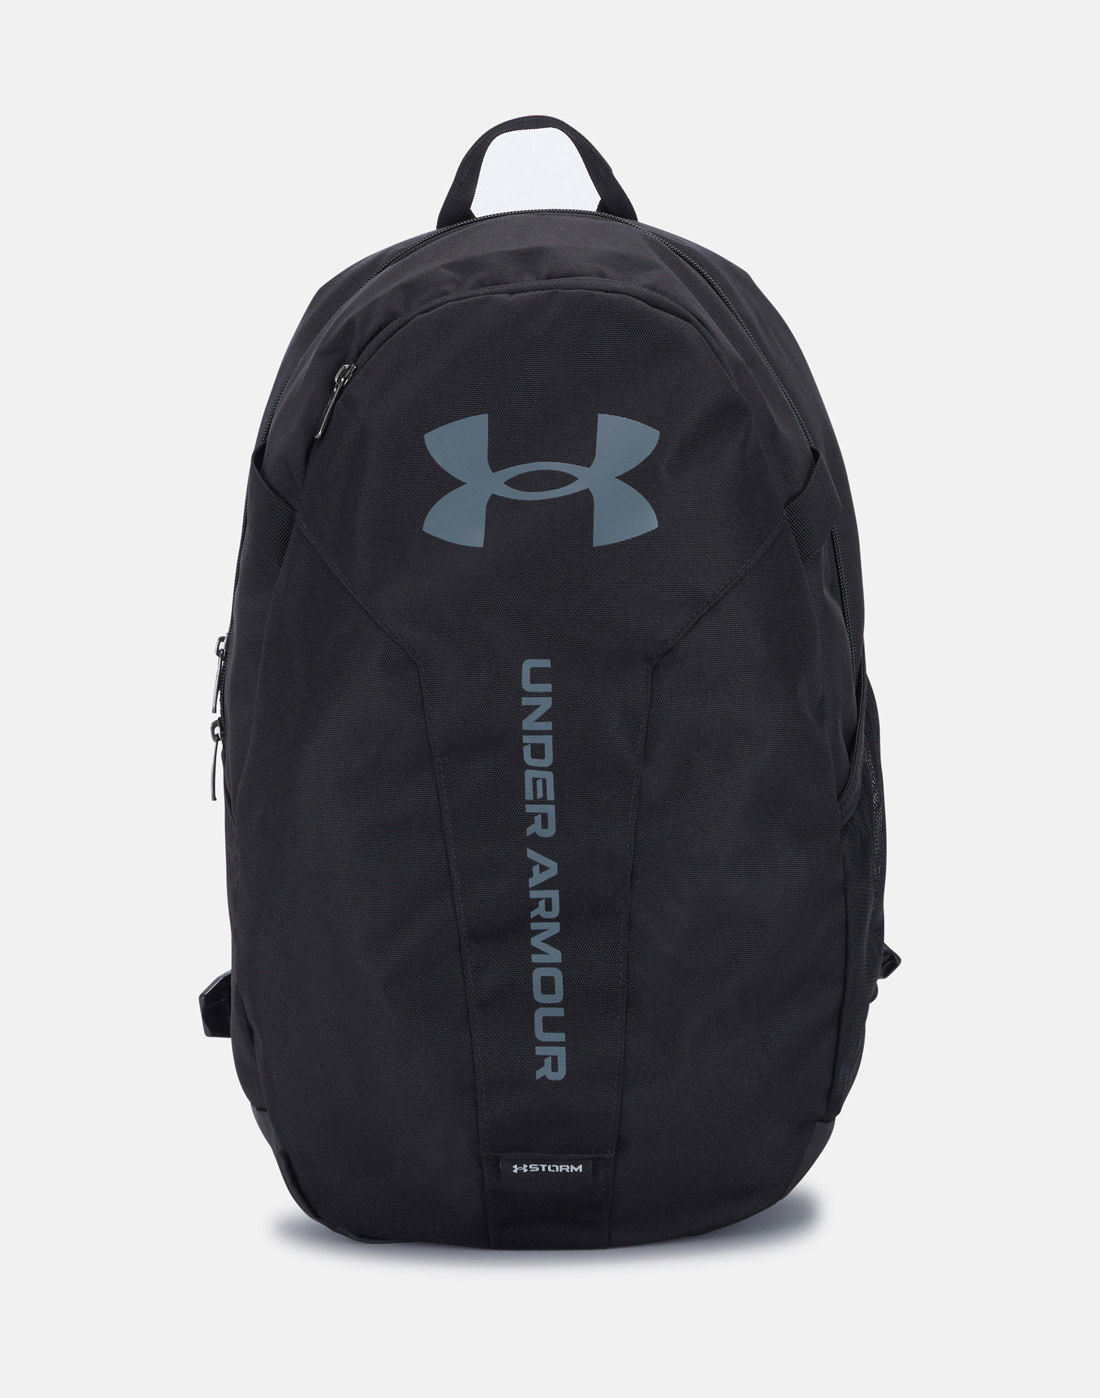 Under Armour Hustle Lite Backpack - Black | Life Style Sports IE